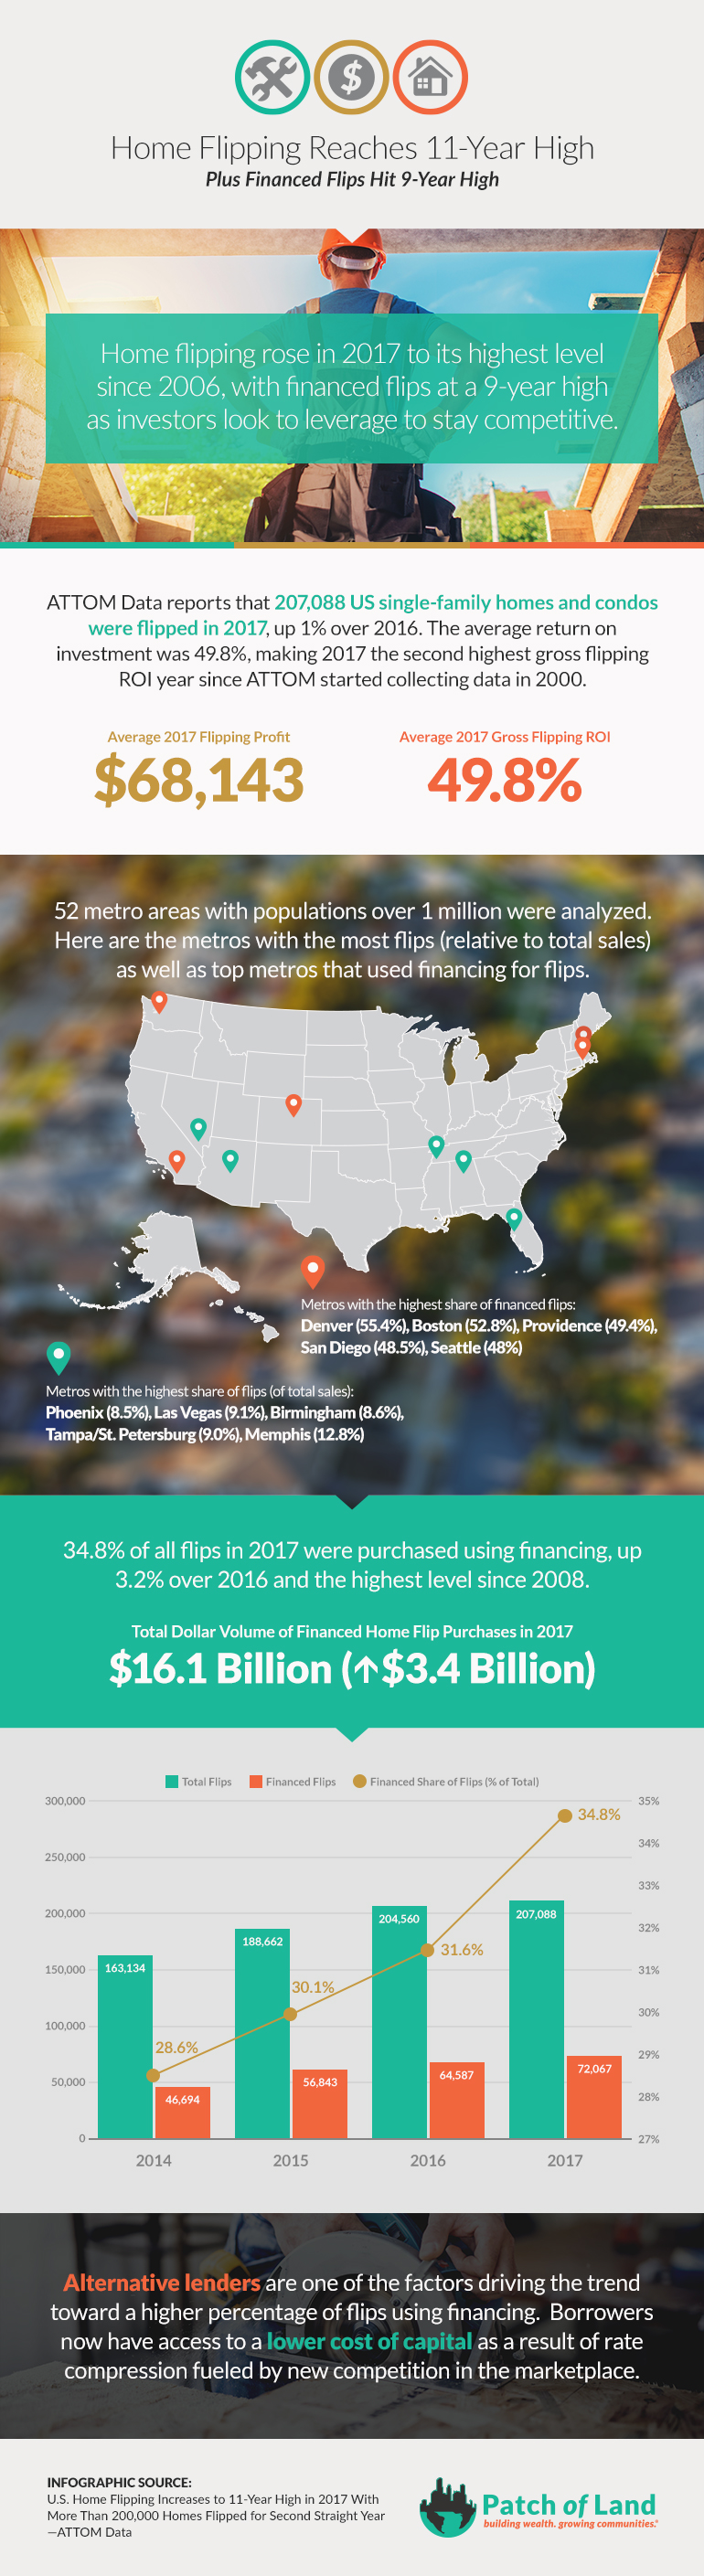 home-flipping-at-11-year-high-infographic